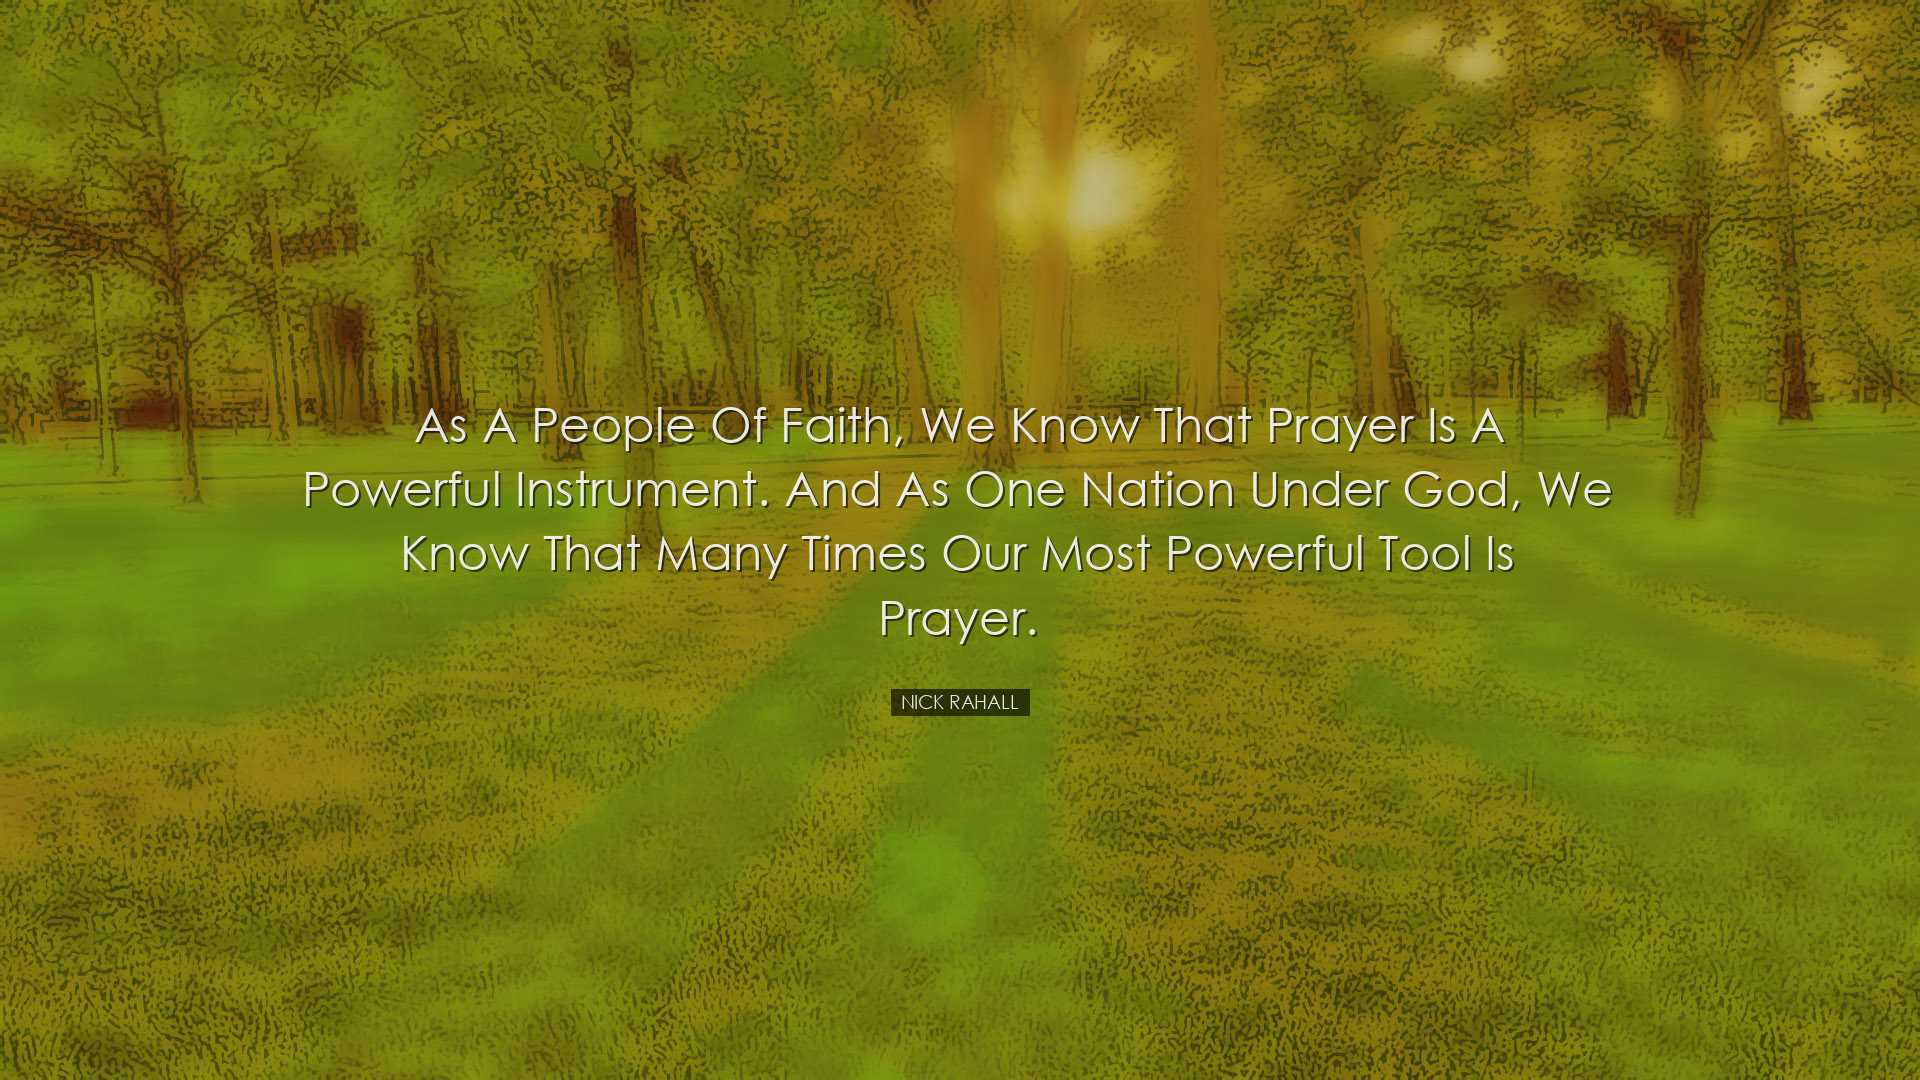 As a people of faith, we know that prayer is a powerful instrument